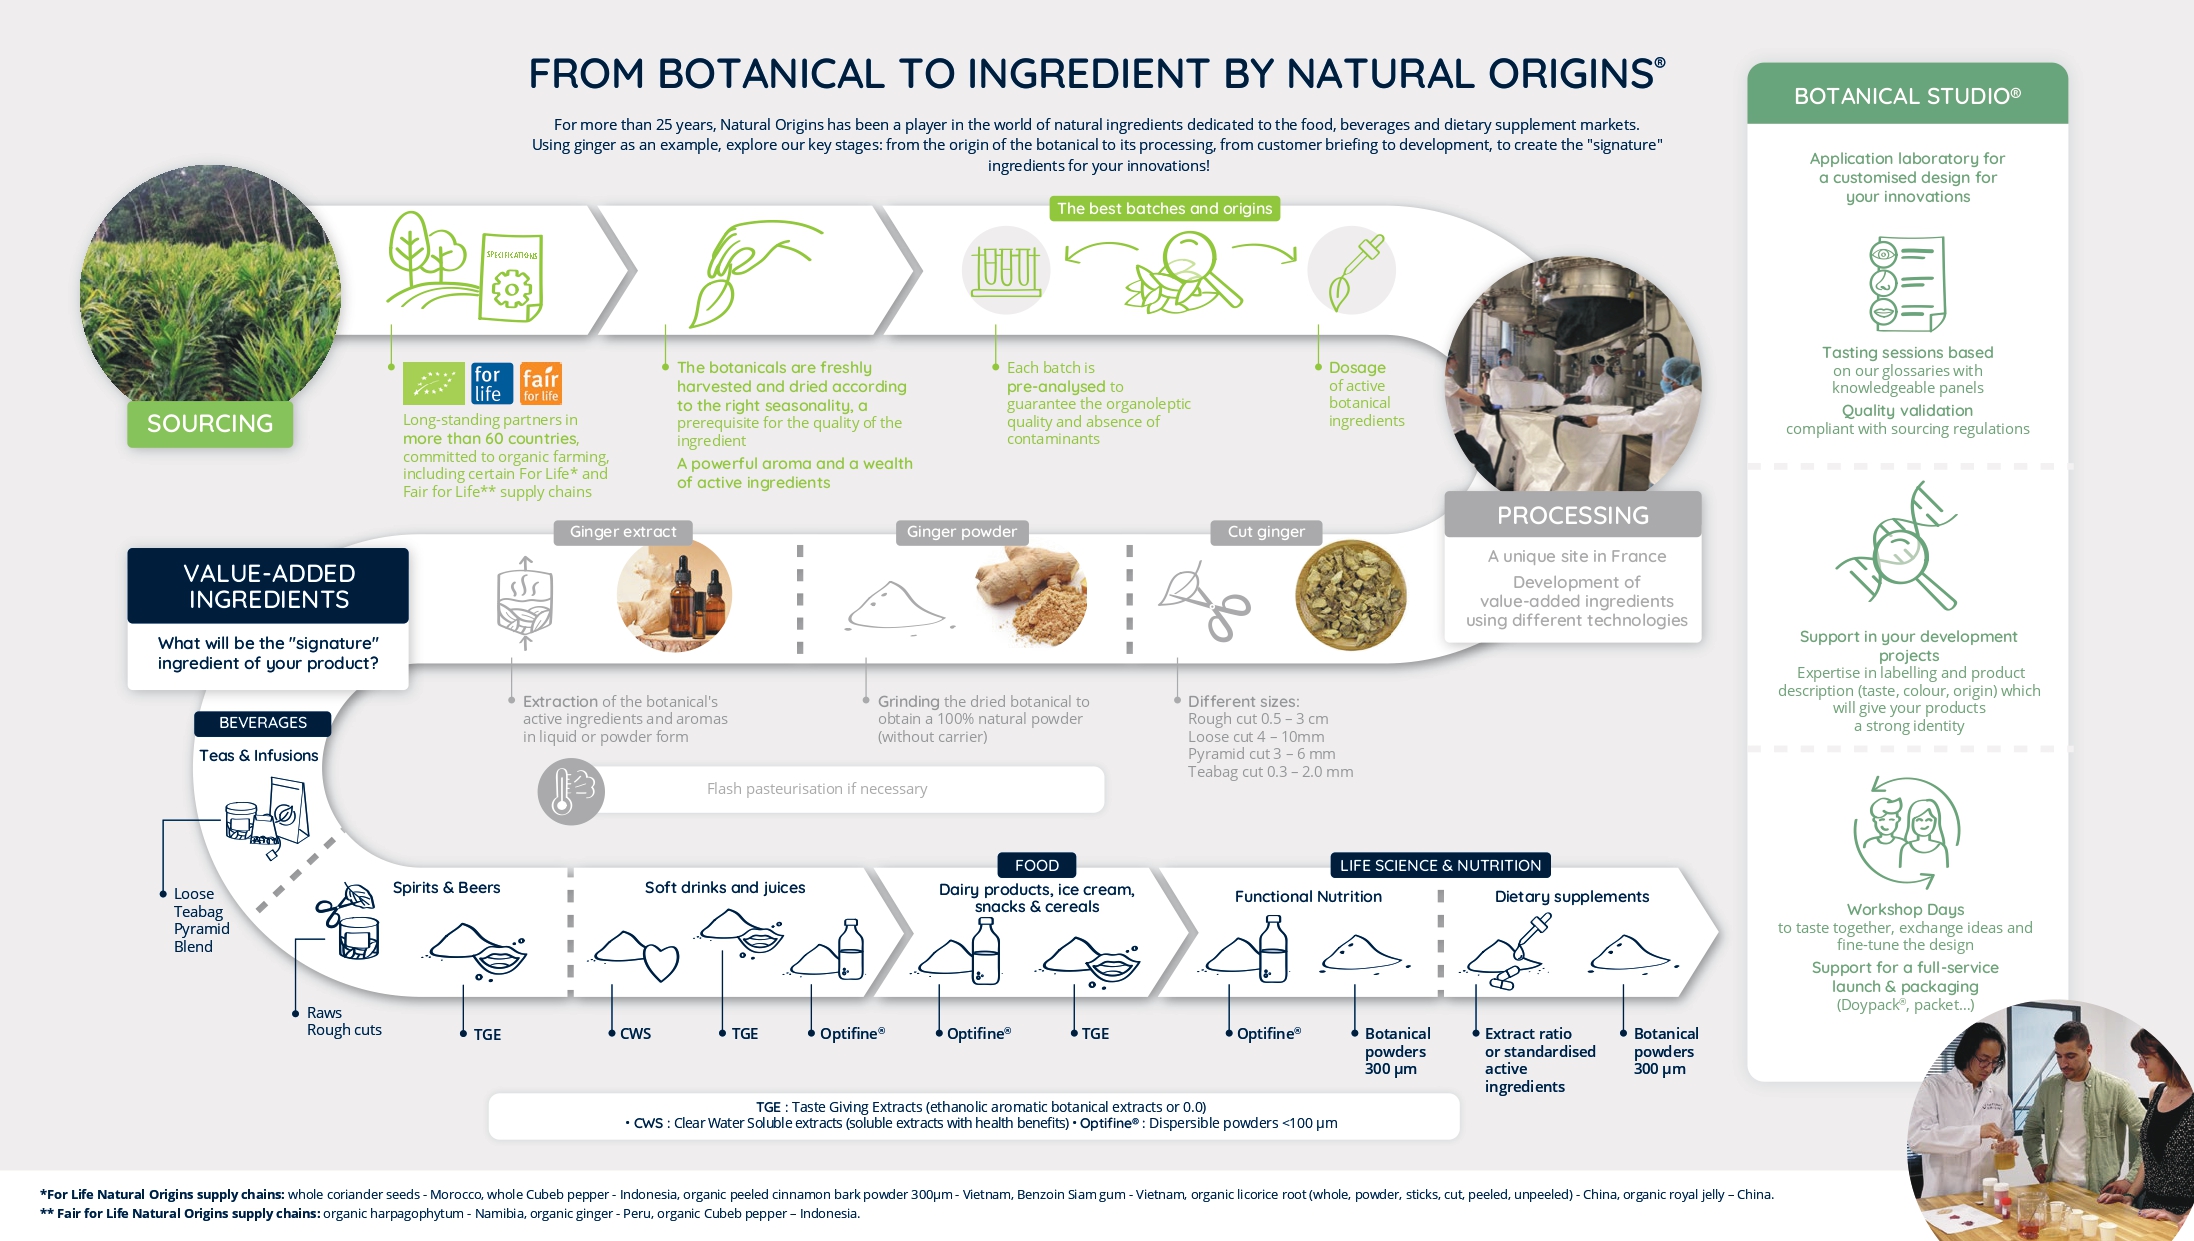 From botanical to ingredient by Natural Origins